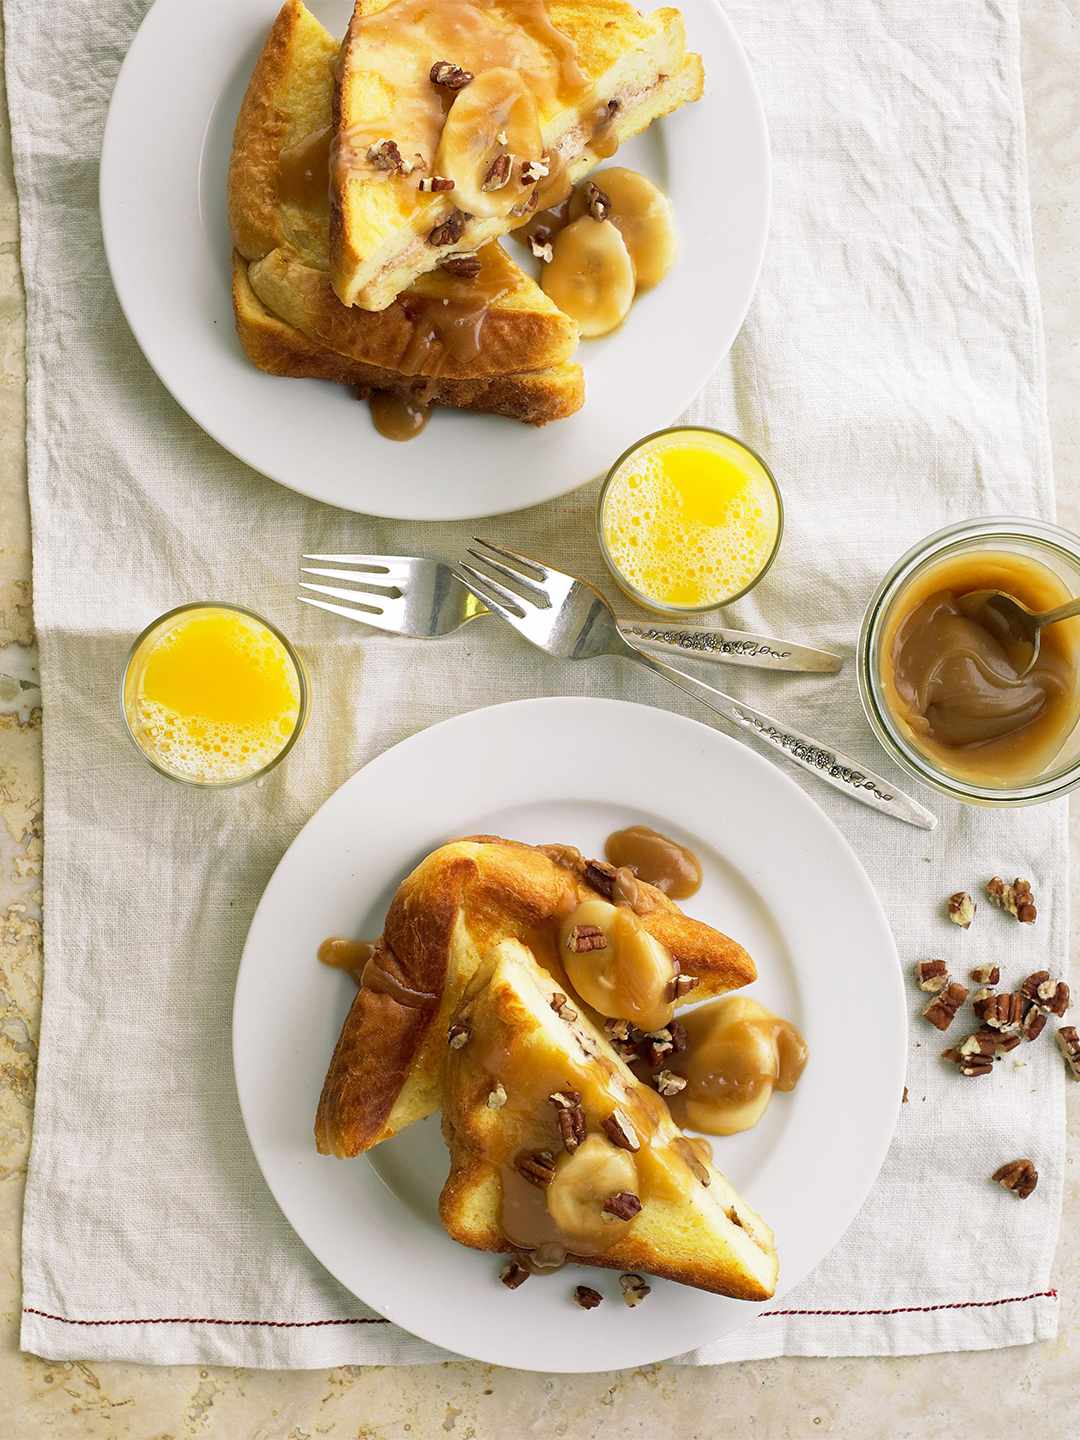 Mascarpone-Stuffed French Toast with bananas and pecans